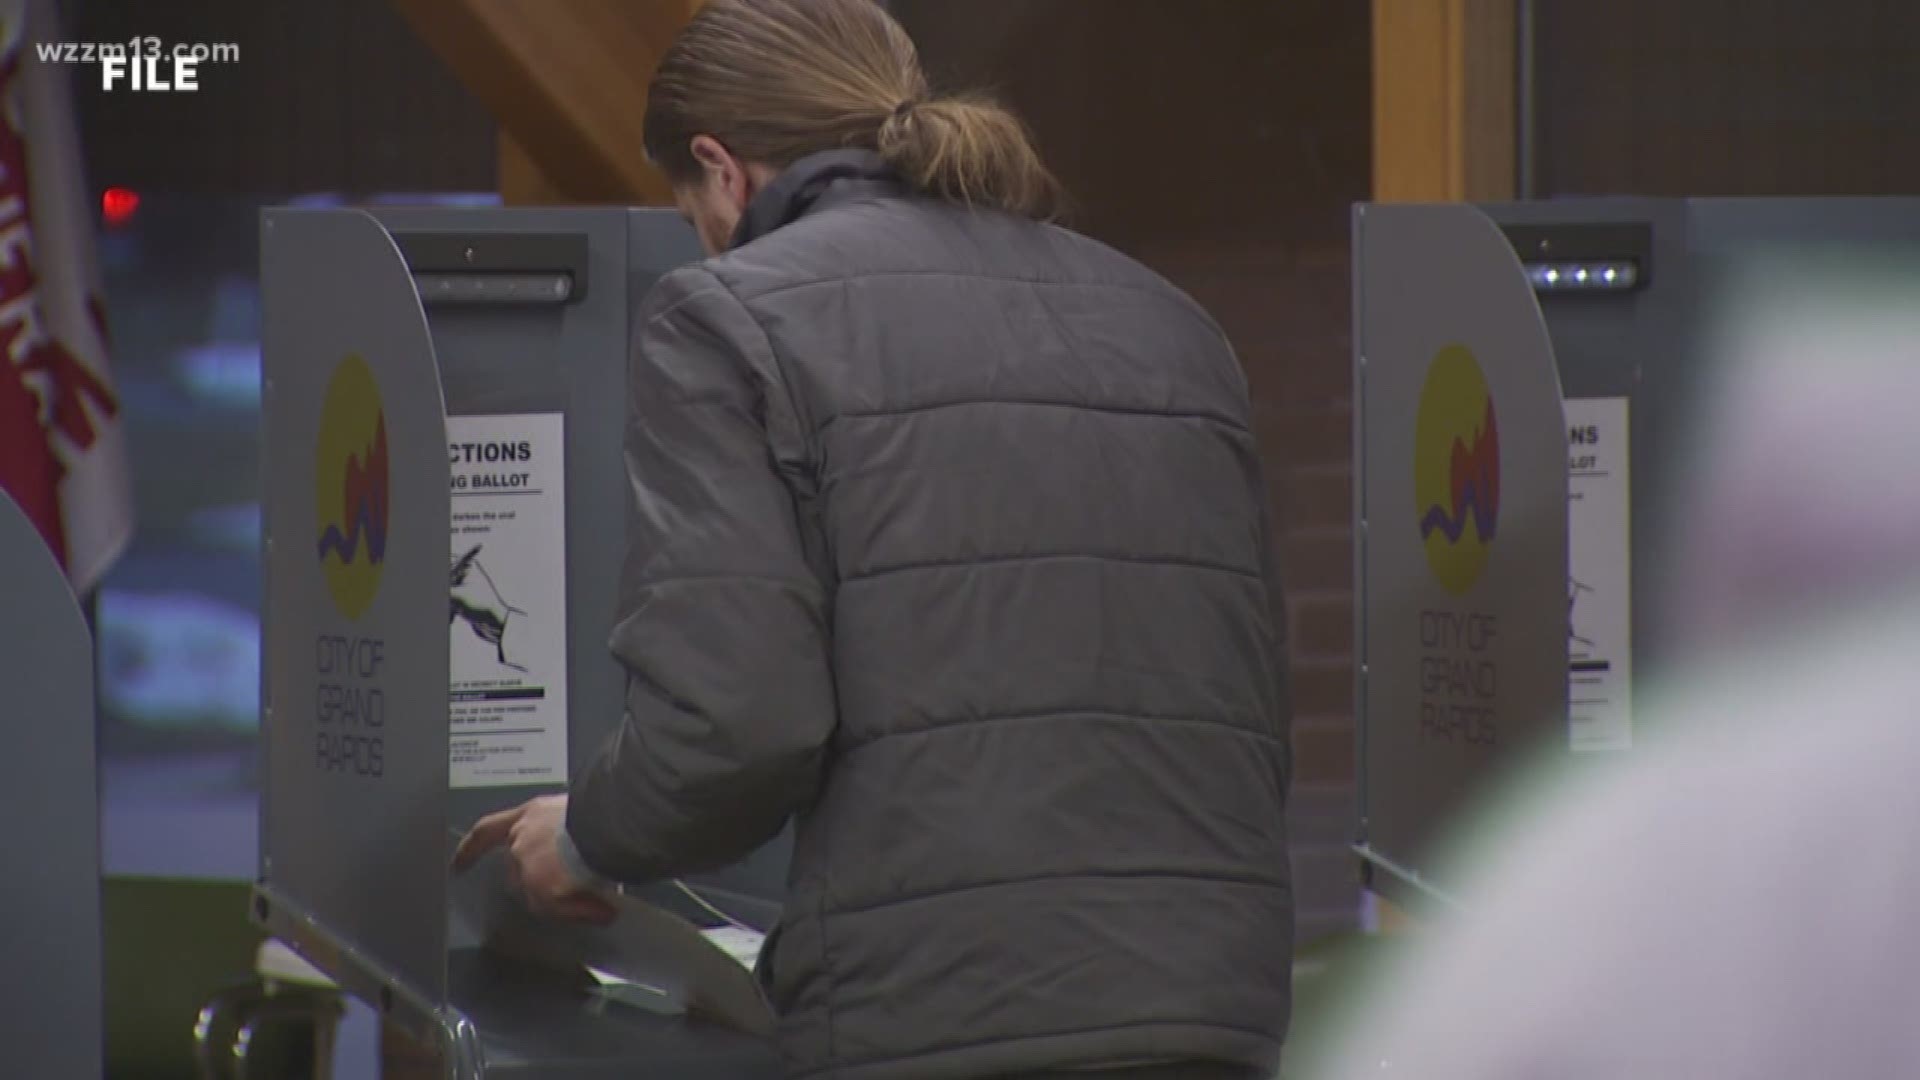 New election audit system coming to Michigan